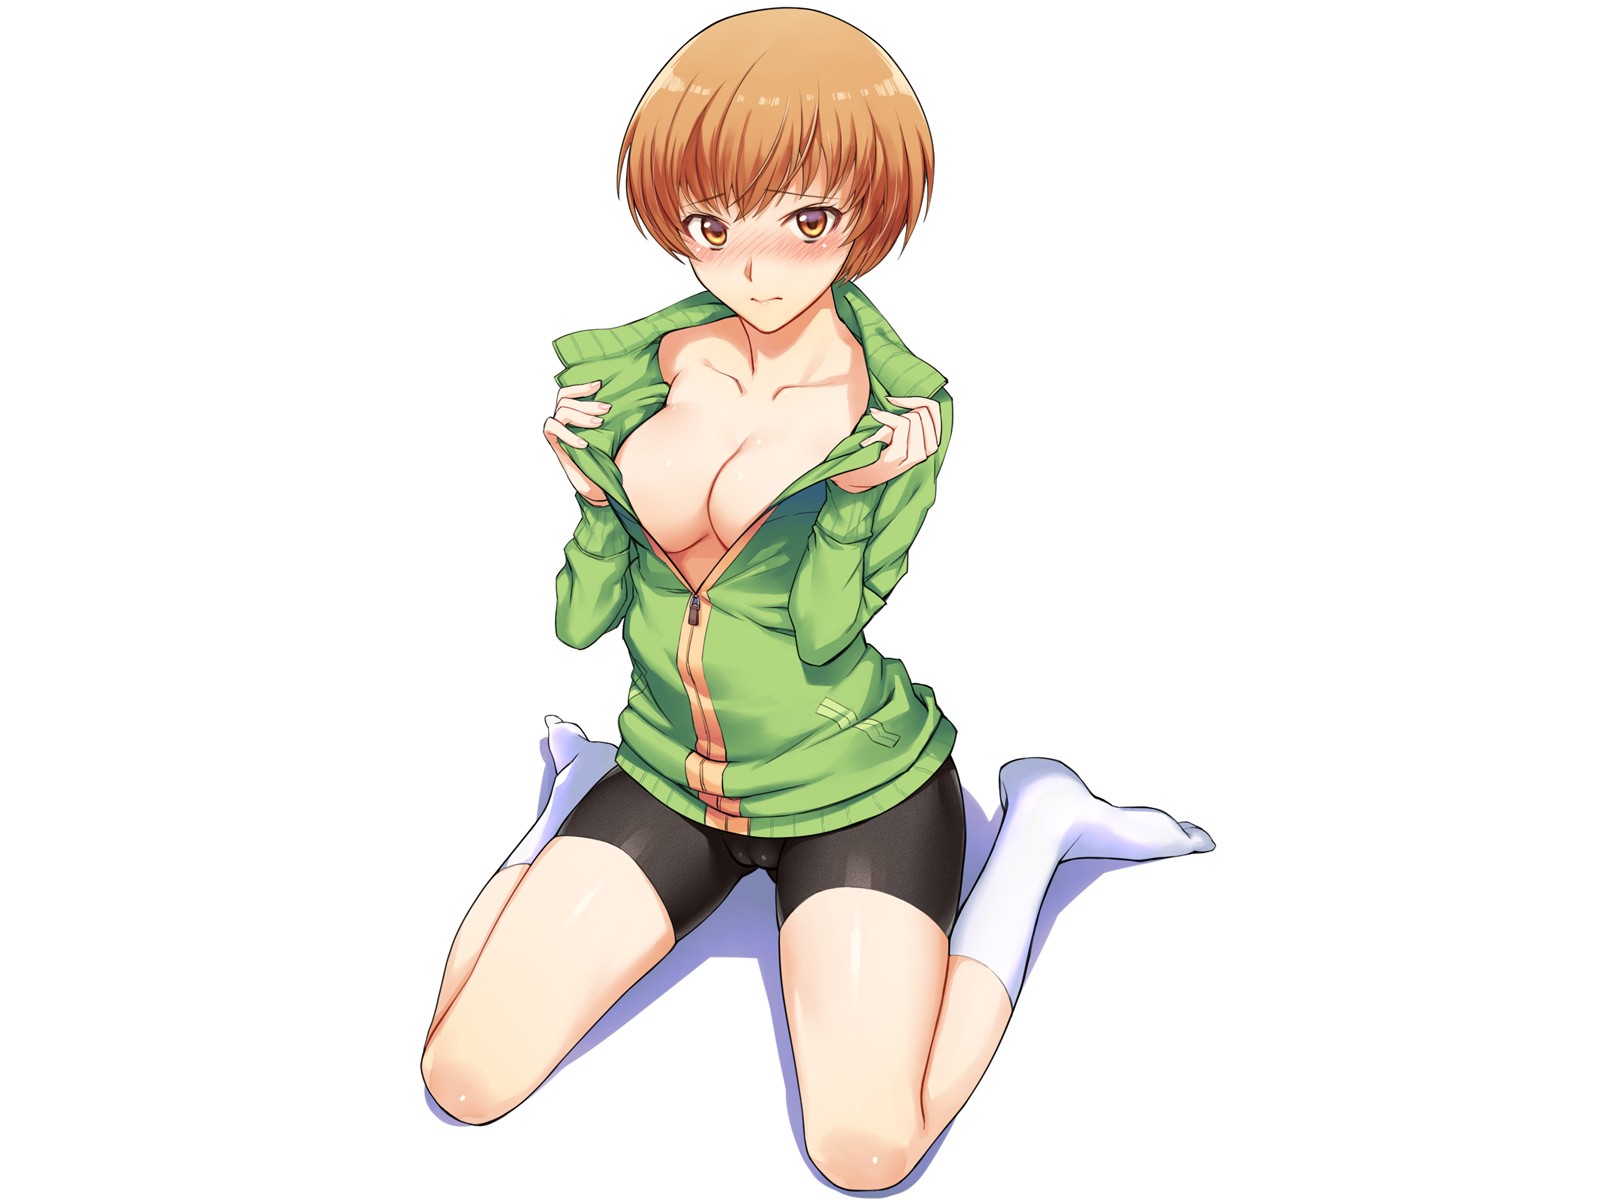 Anime 1600x1200 anime anime girls open shirt short hair Persona 4 cleavage Persona series cameltoe Satonaka Chie boobs video games video game girls fan art looking at viewer green clothing women